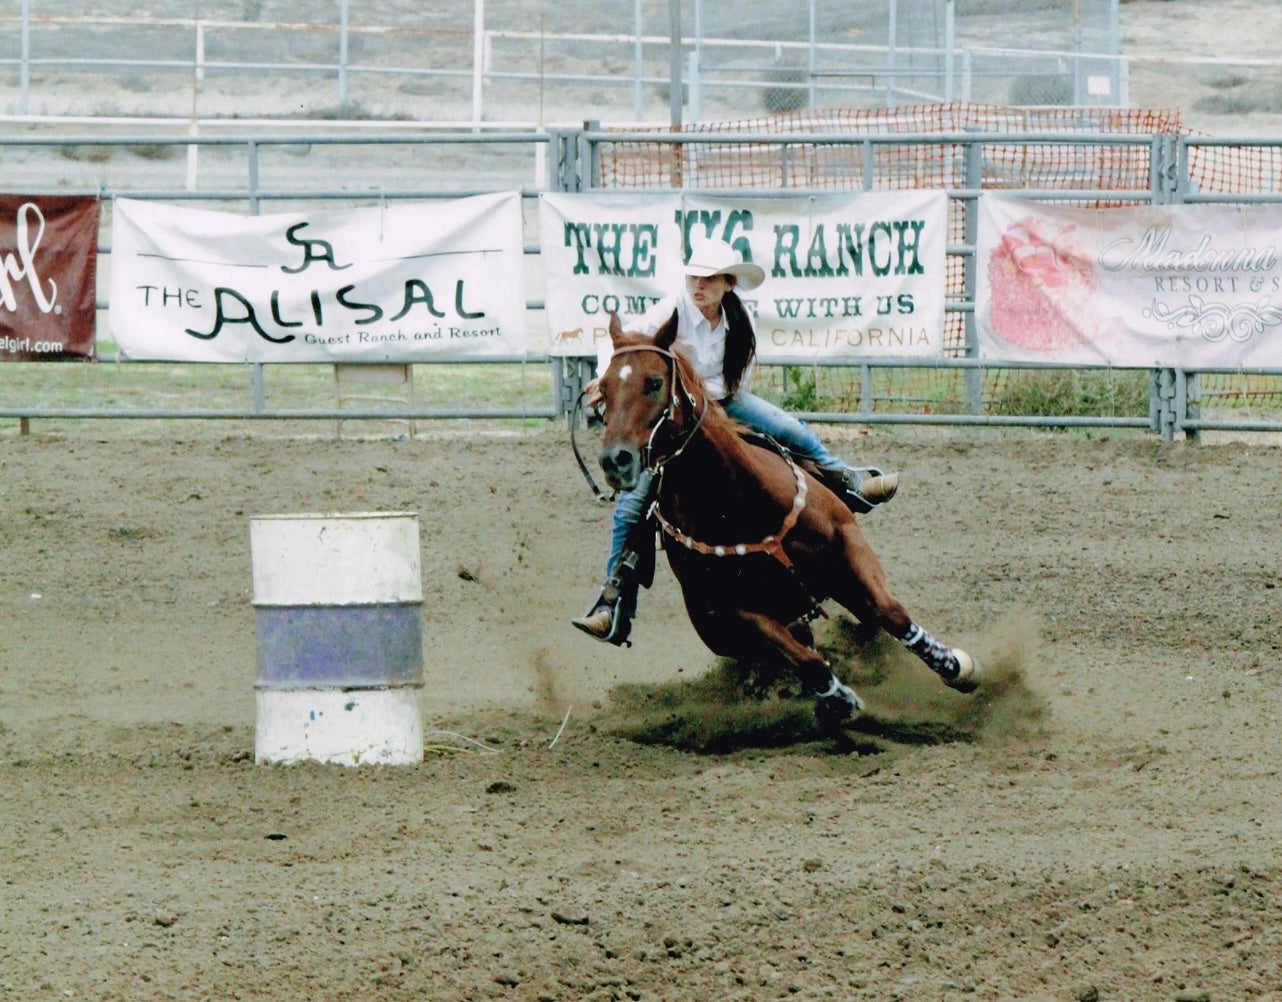 Are There Any Rodeo Schools Or Training Centers In California?